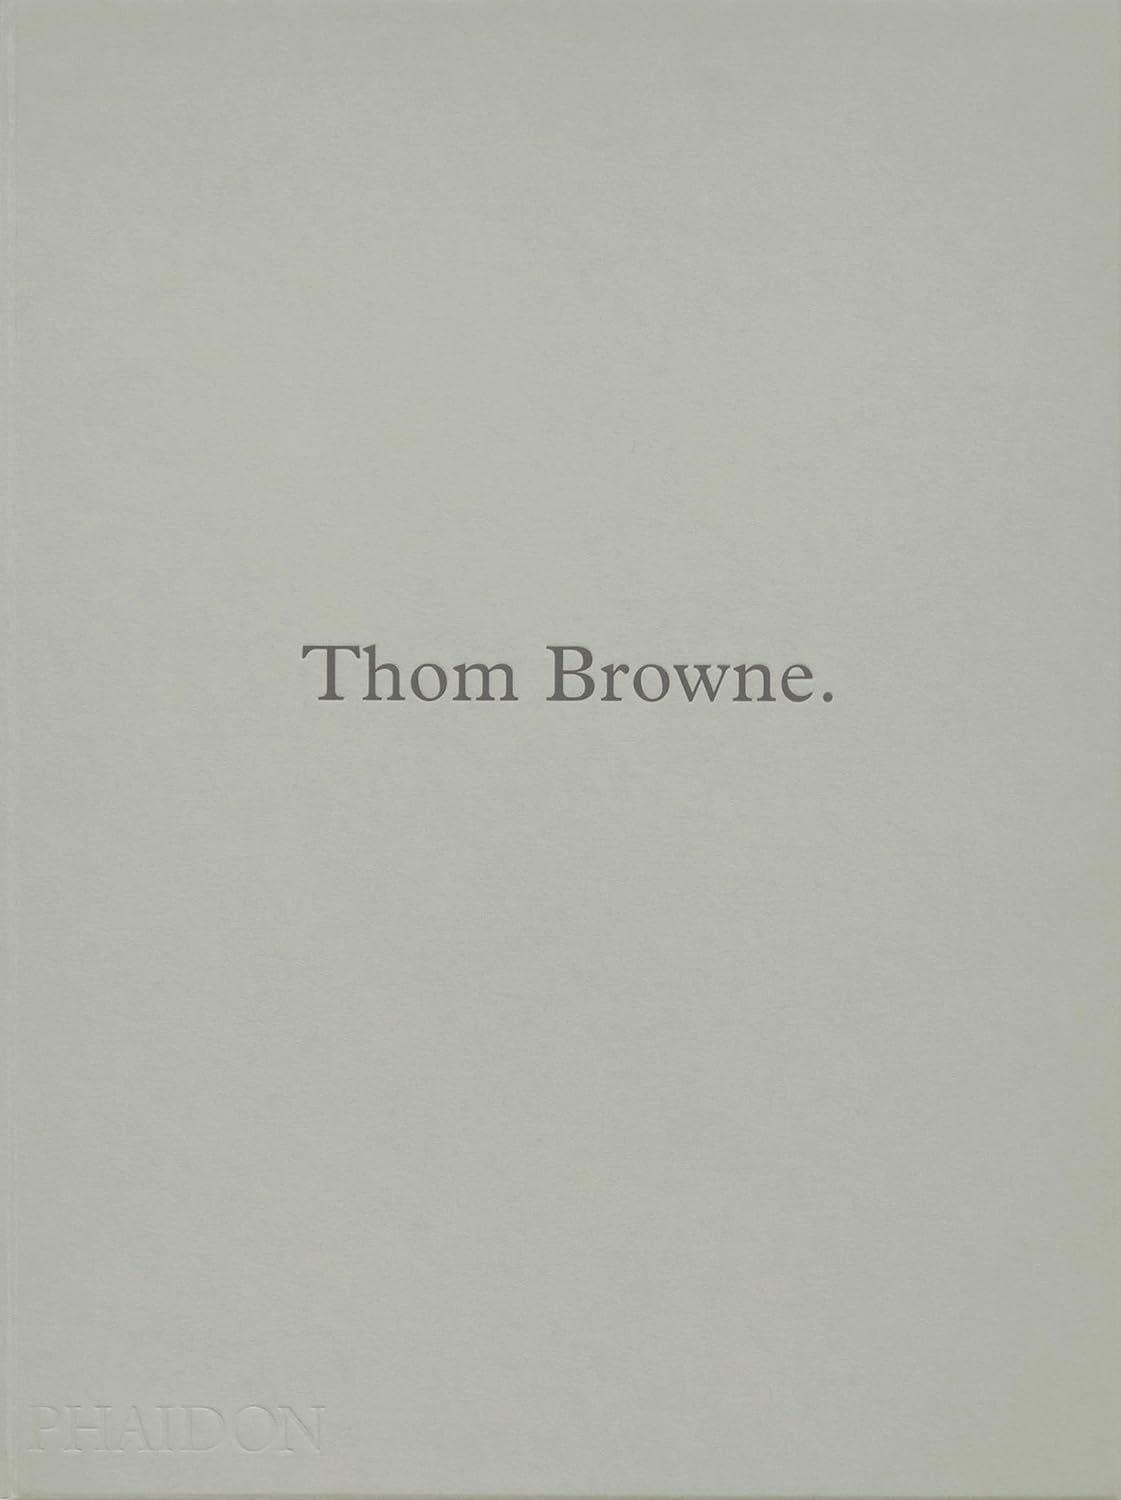 A plain grey book cover with the words Thom Browne on it.